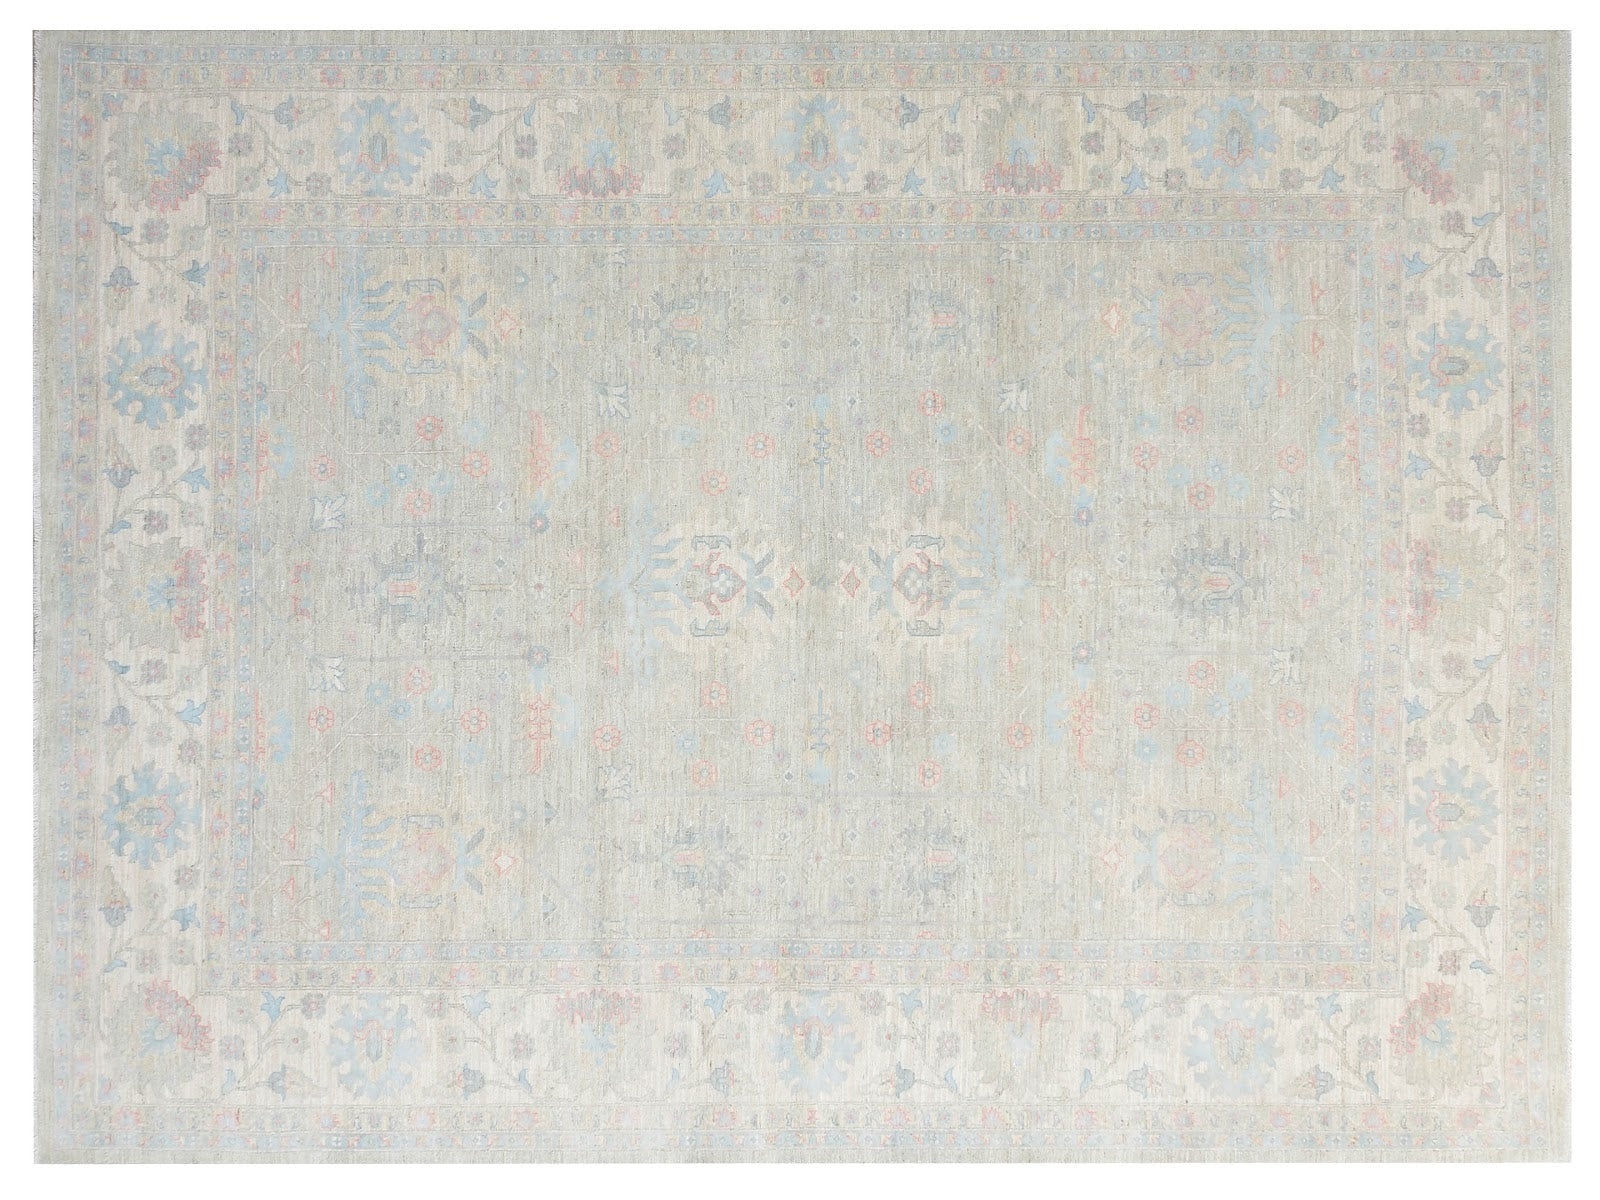 10x14 Vintage Ziegler Wool Rug with Gray and Neutral Tones, Ivory Border